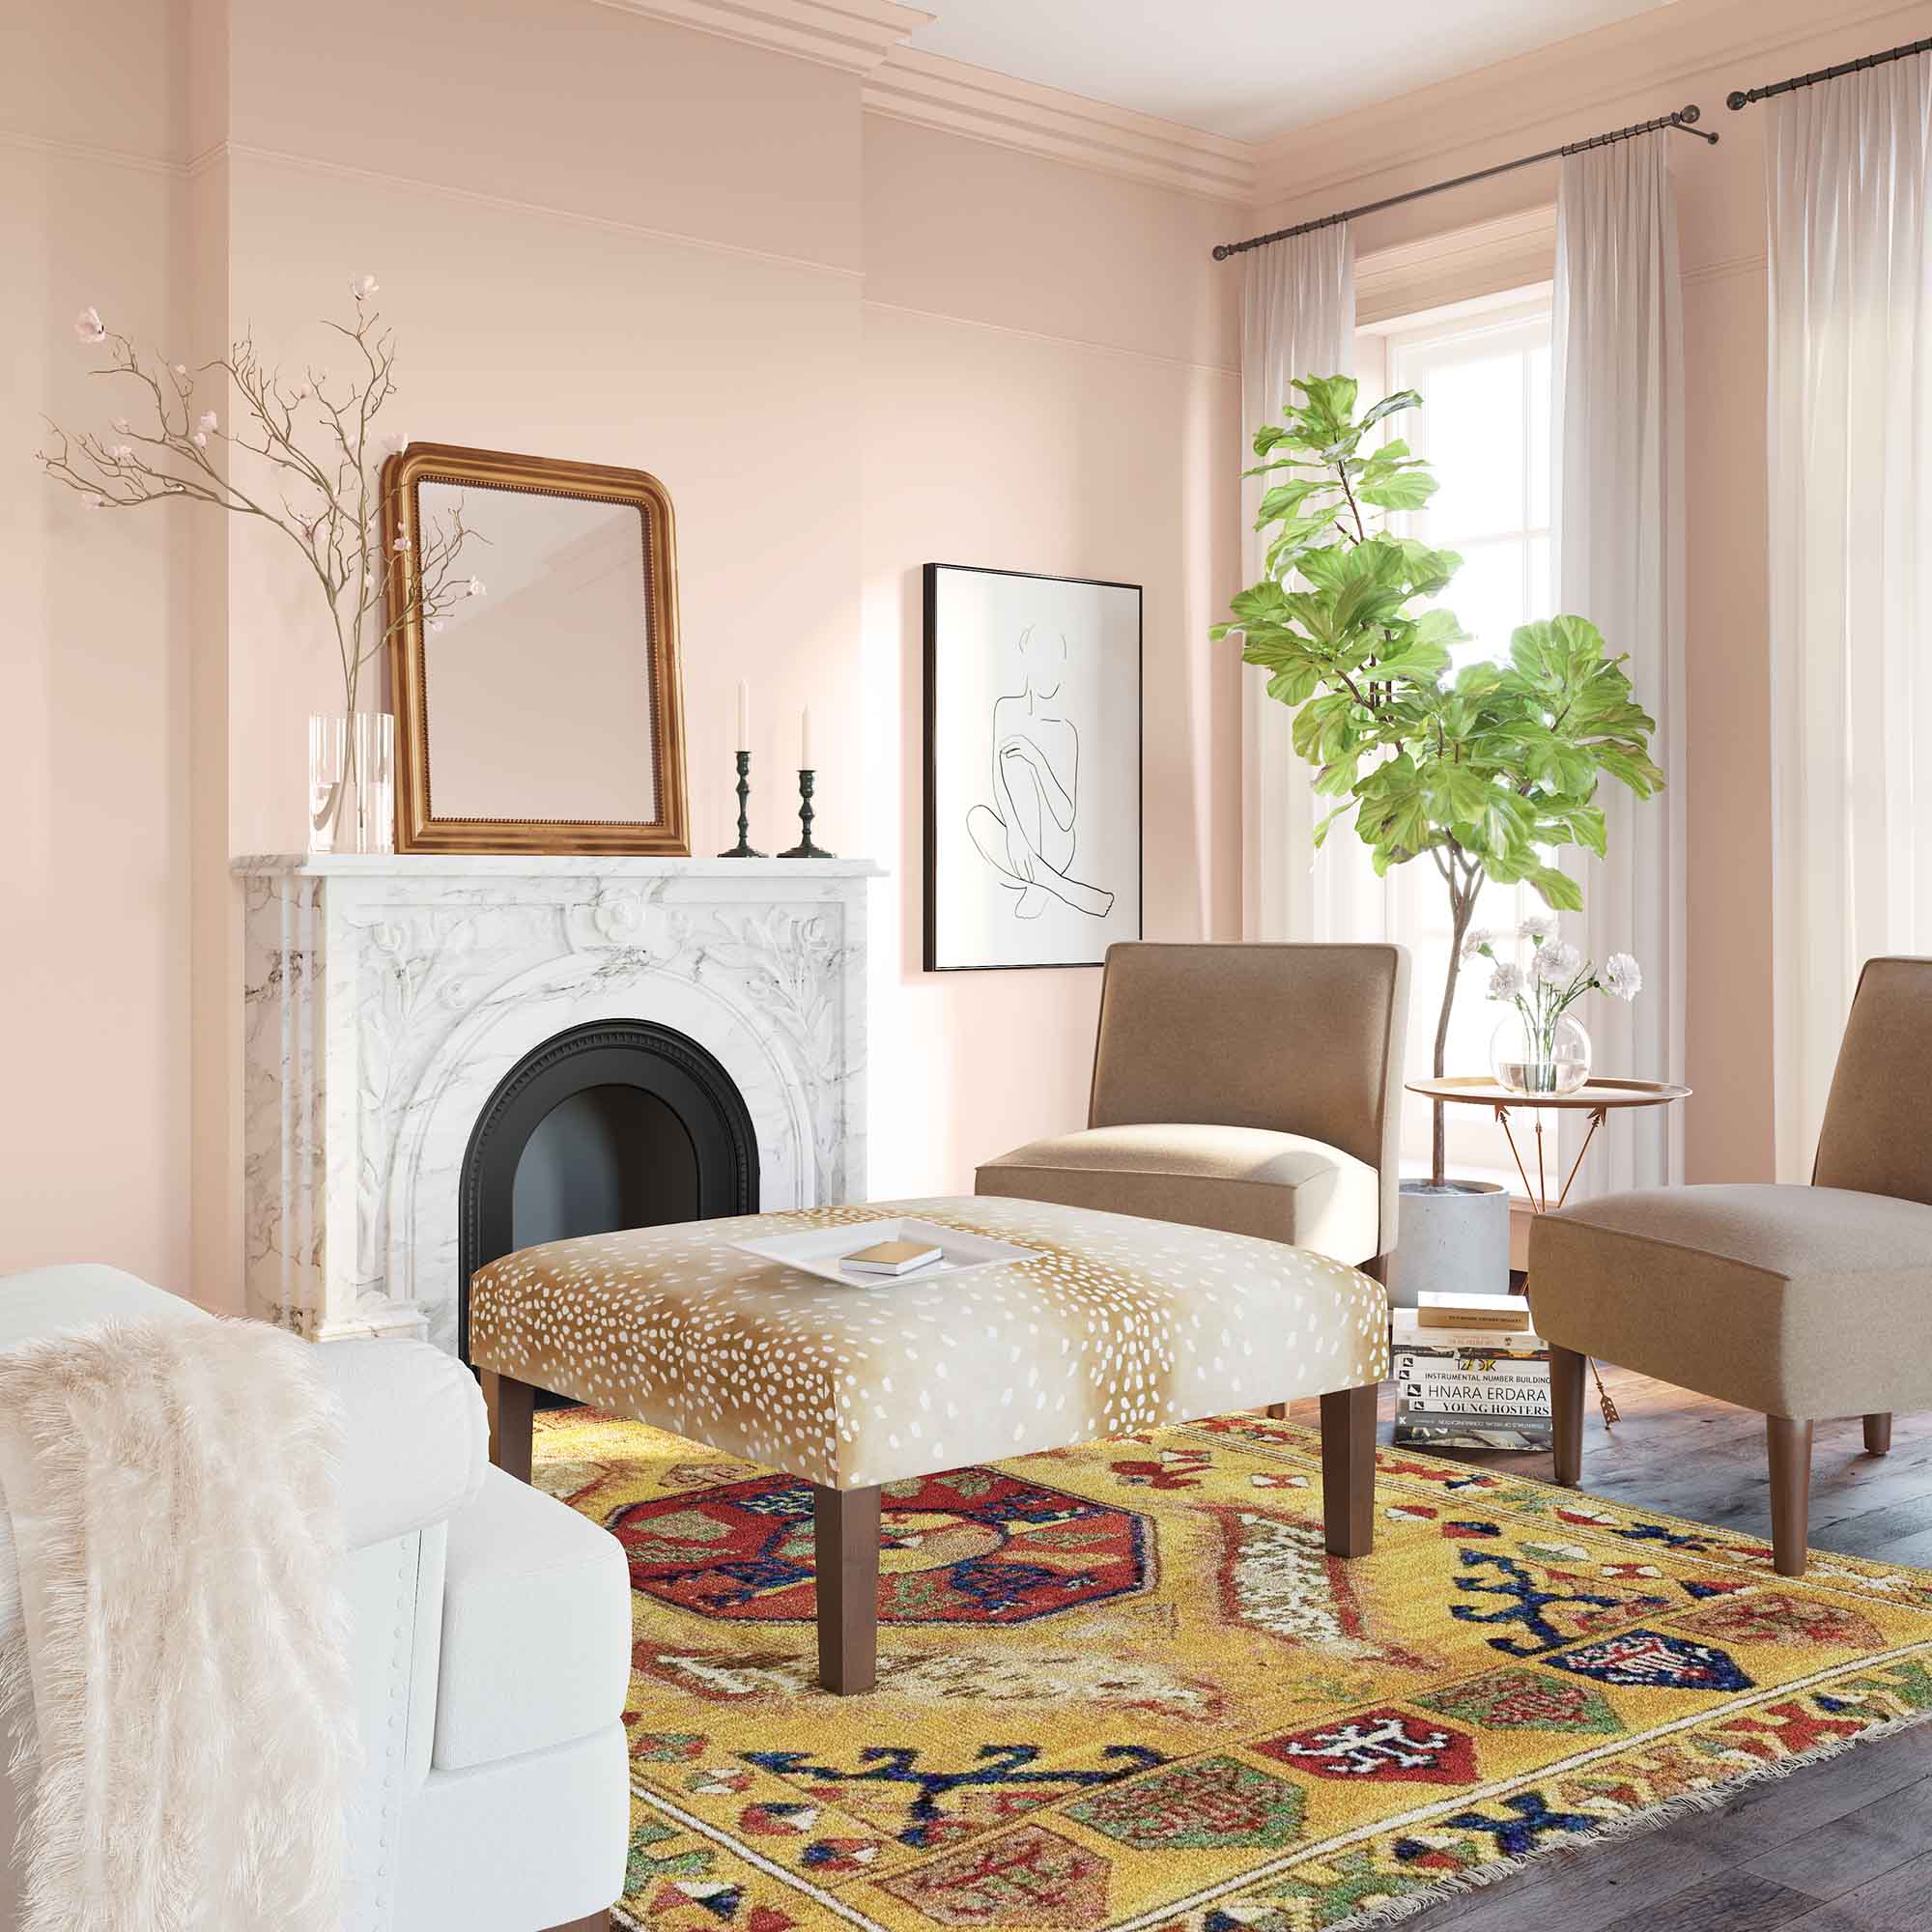 Find the Perfect Pink Paint Color: The Experts Share Their